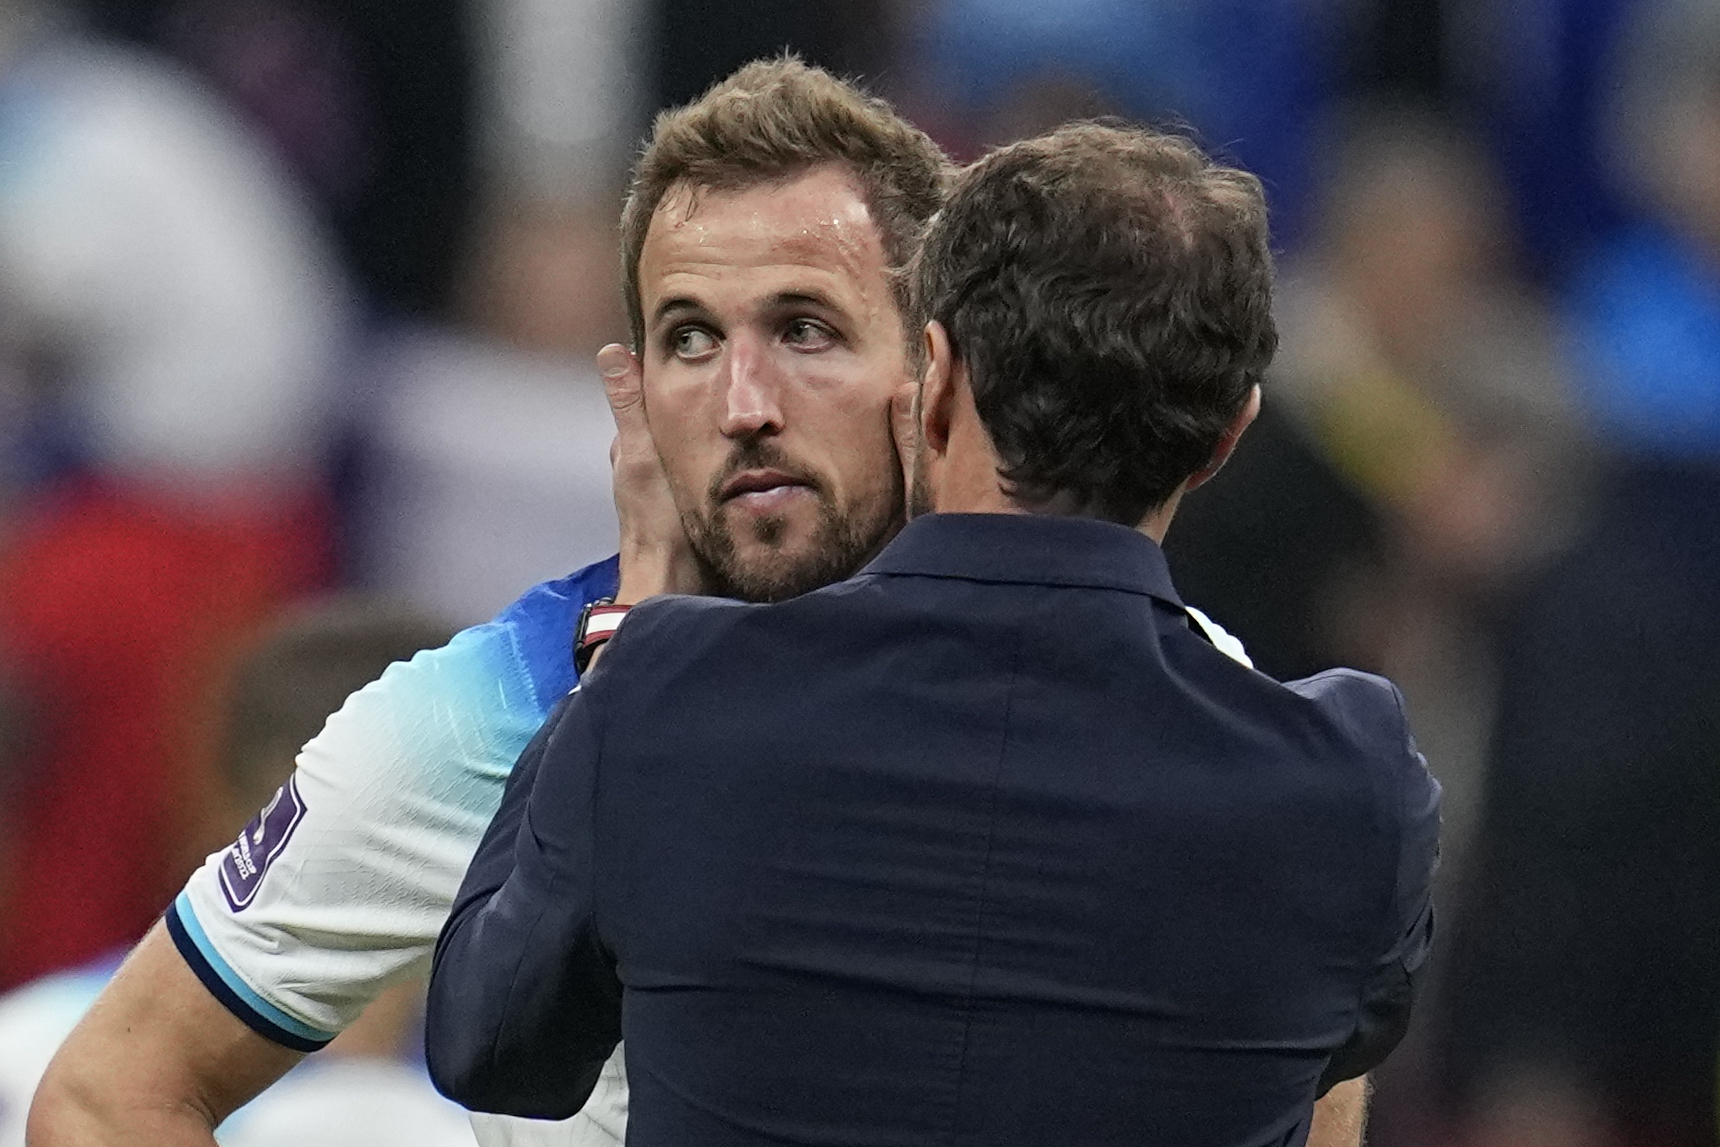 England's Harry Kane is comforted by head coach Gareth Southgate